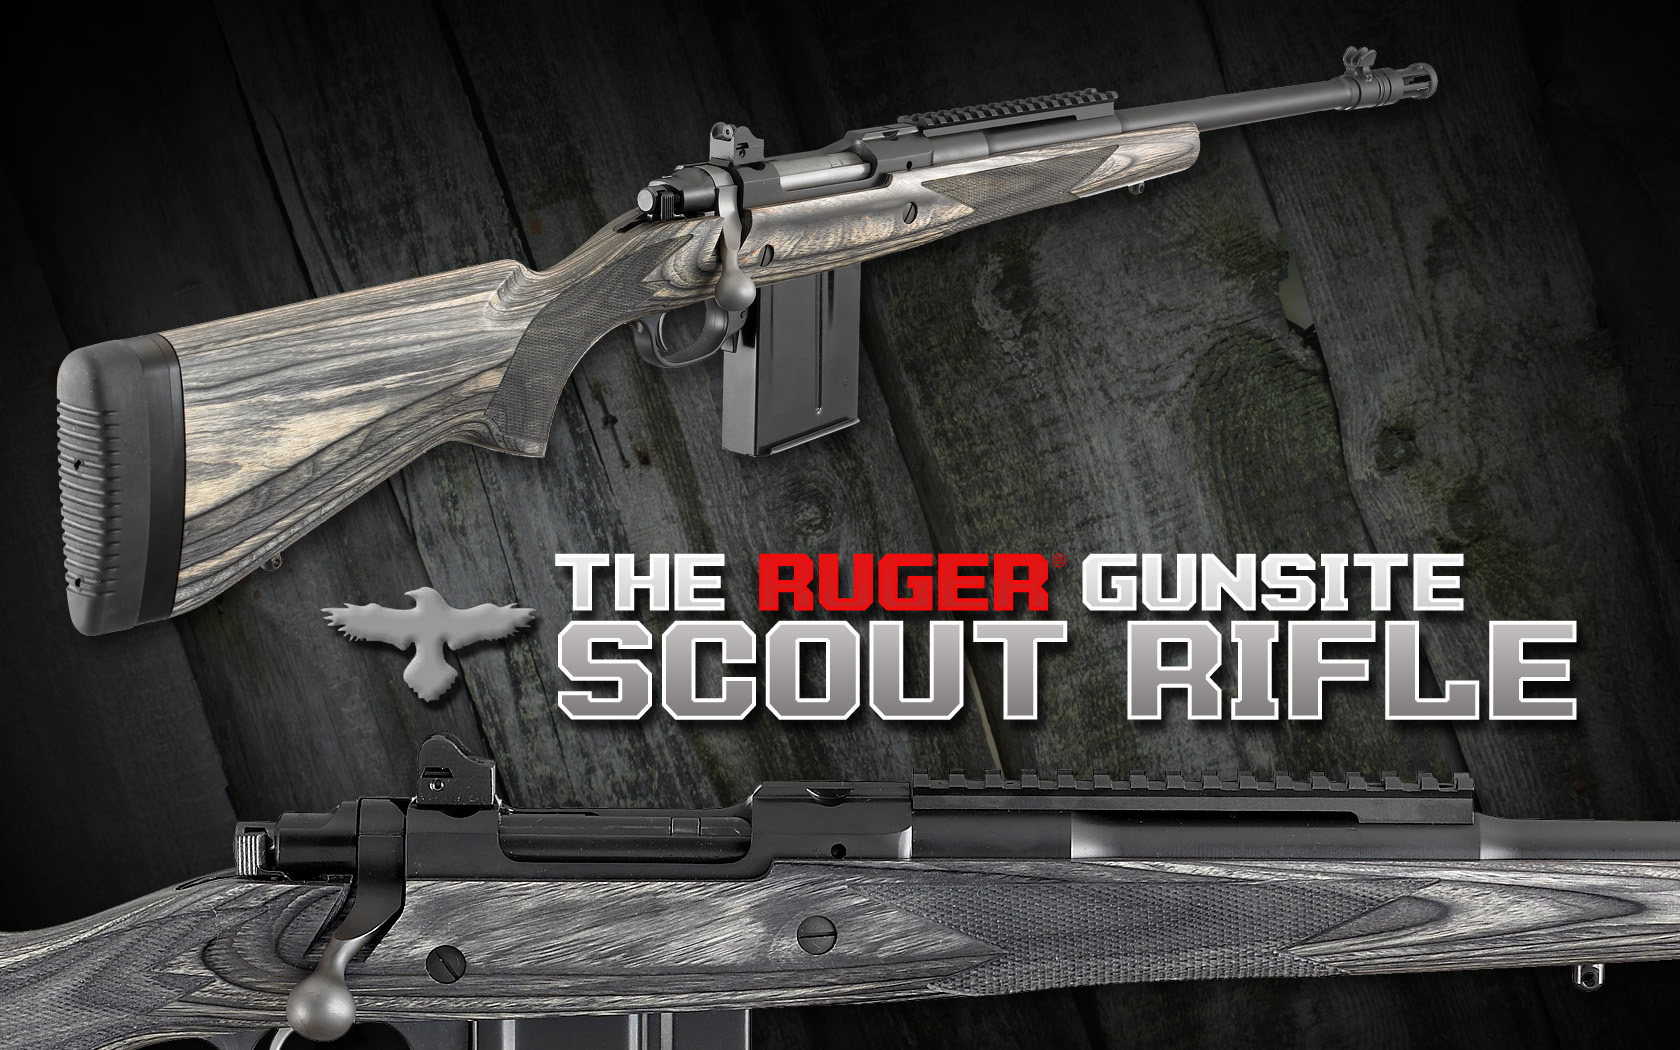 The Ruger Gunsite Scout Rifle Desktop Background